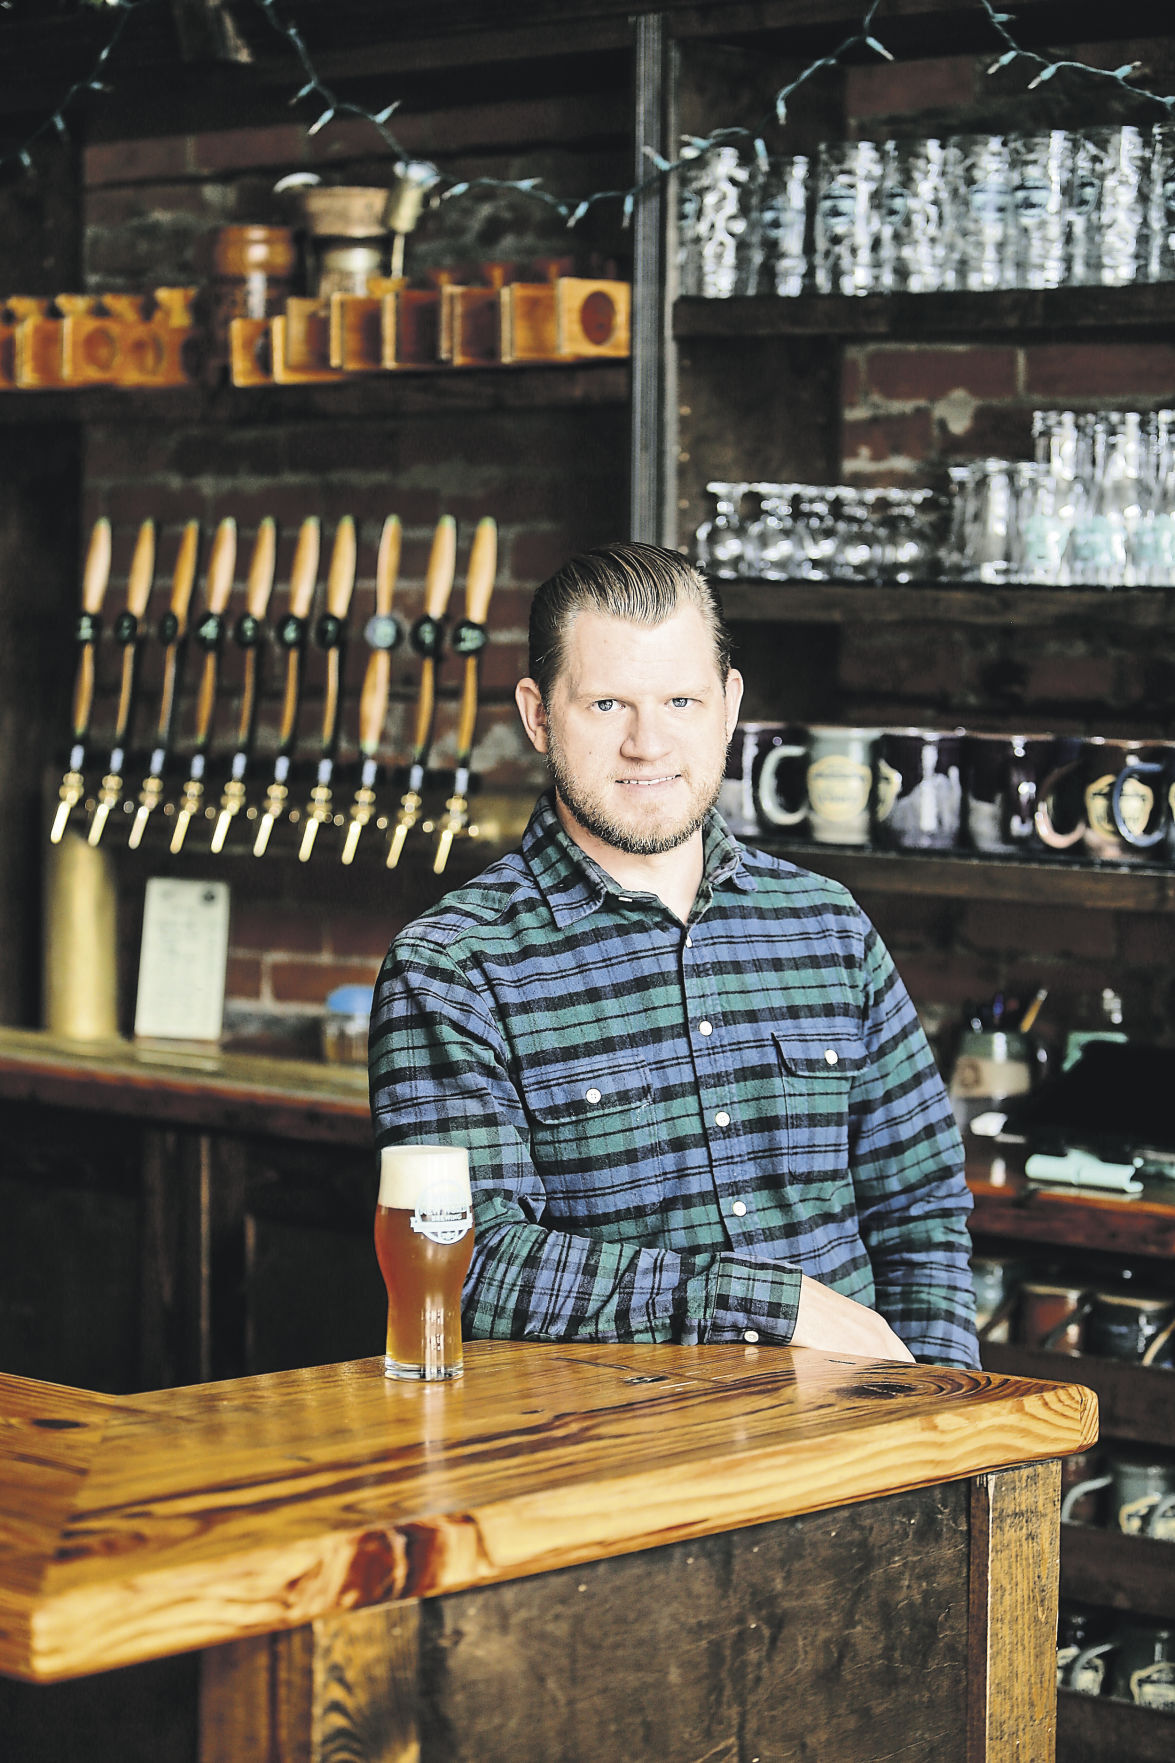 Jay Jubeck is the owner of Jubeck New World Brewing in Dubuque.    PHOTO CREDIT: Dave Kettering